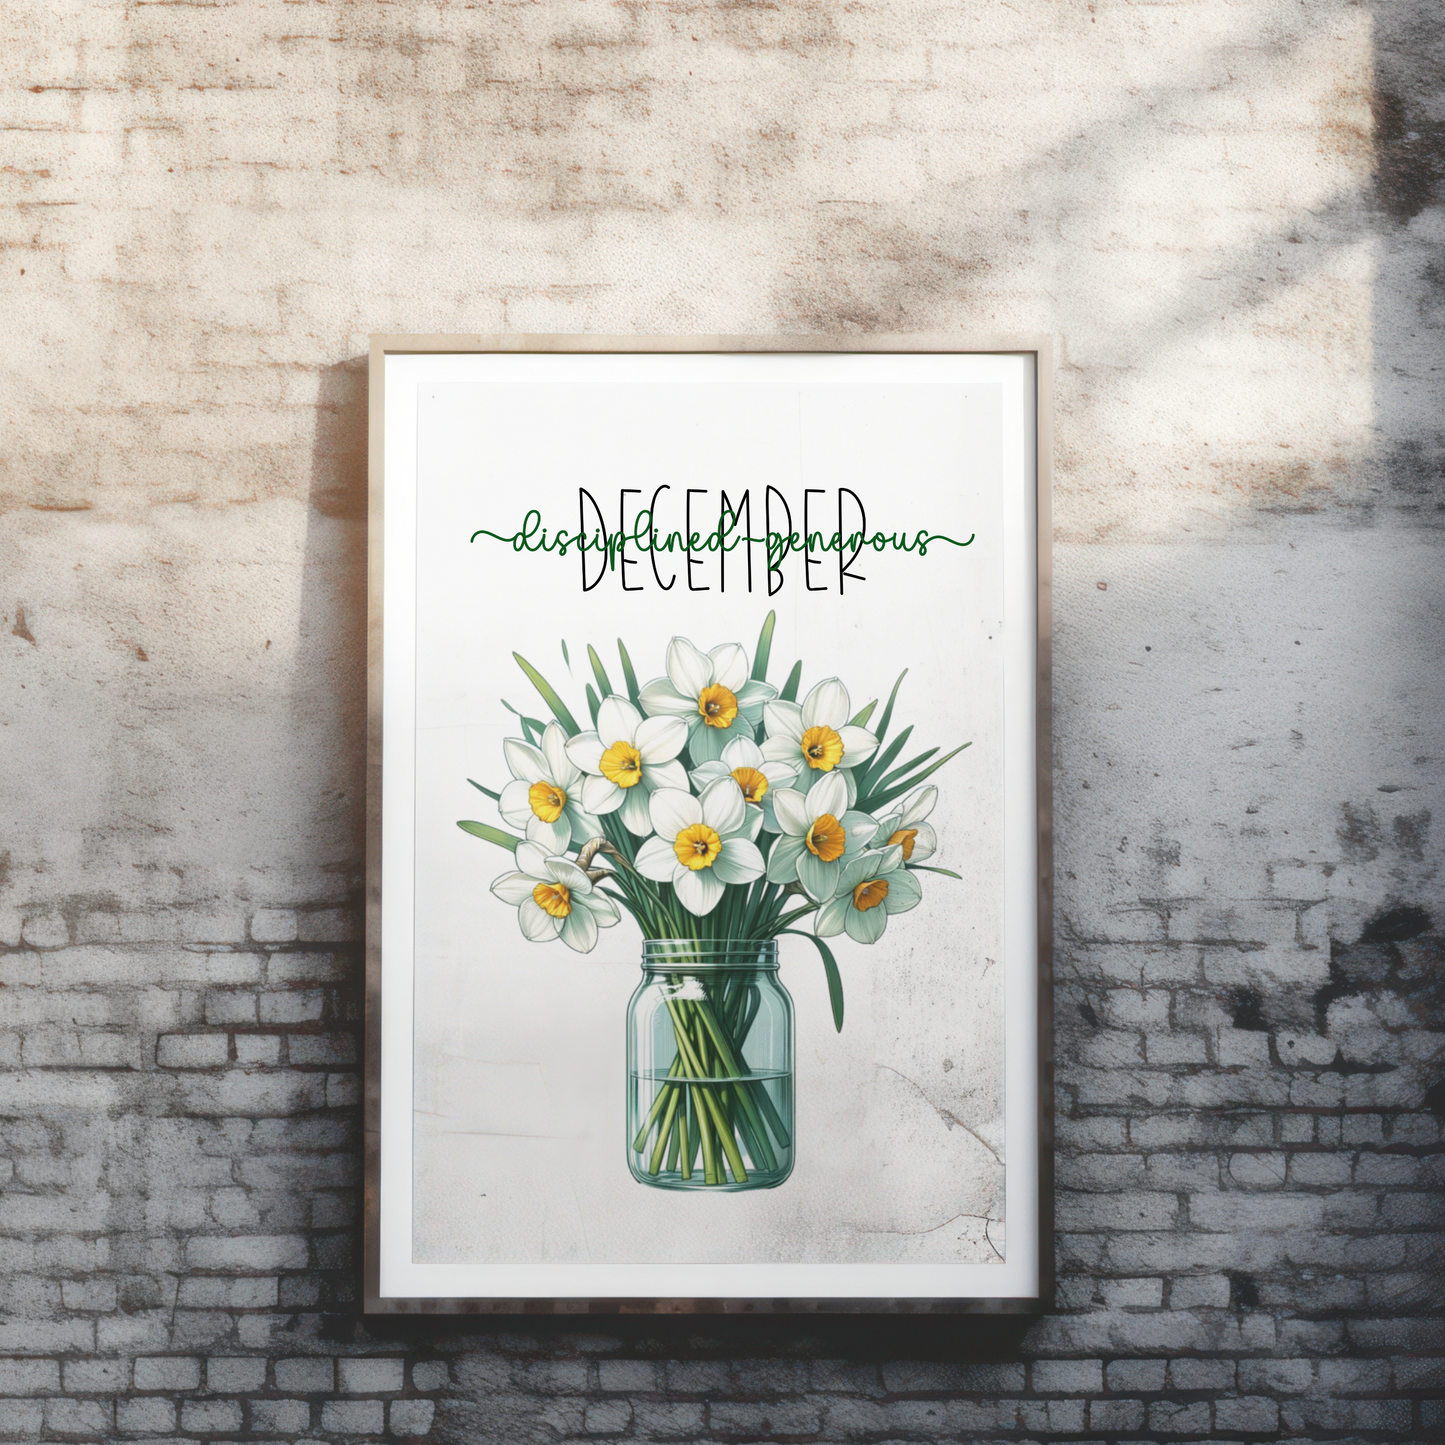 Flower Month of December the Narcissus, PNG, PDF PDF digital downloads December Birth Month Flowers sublimation cricut silhouette dtf